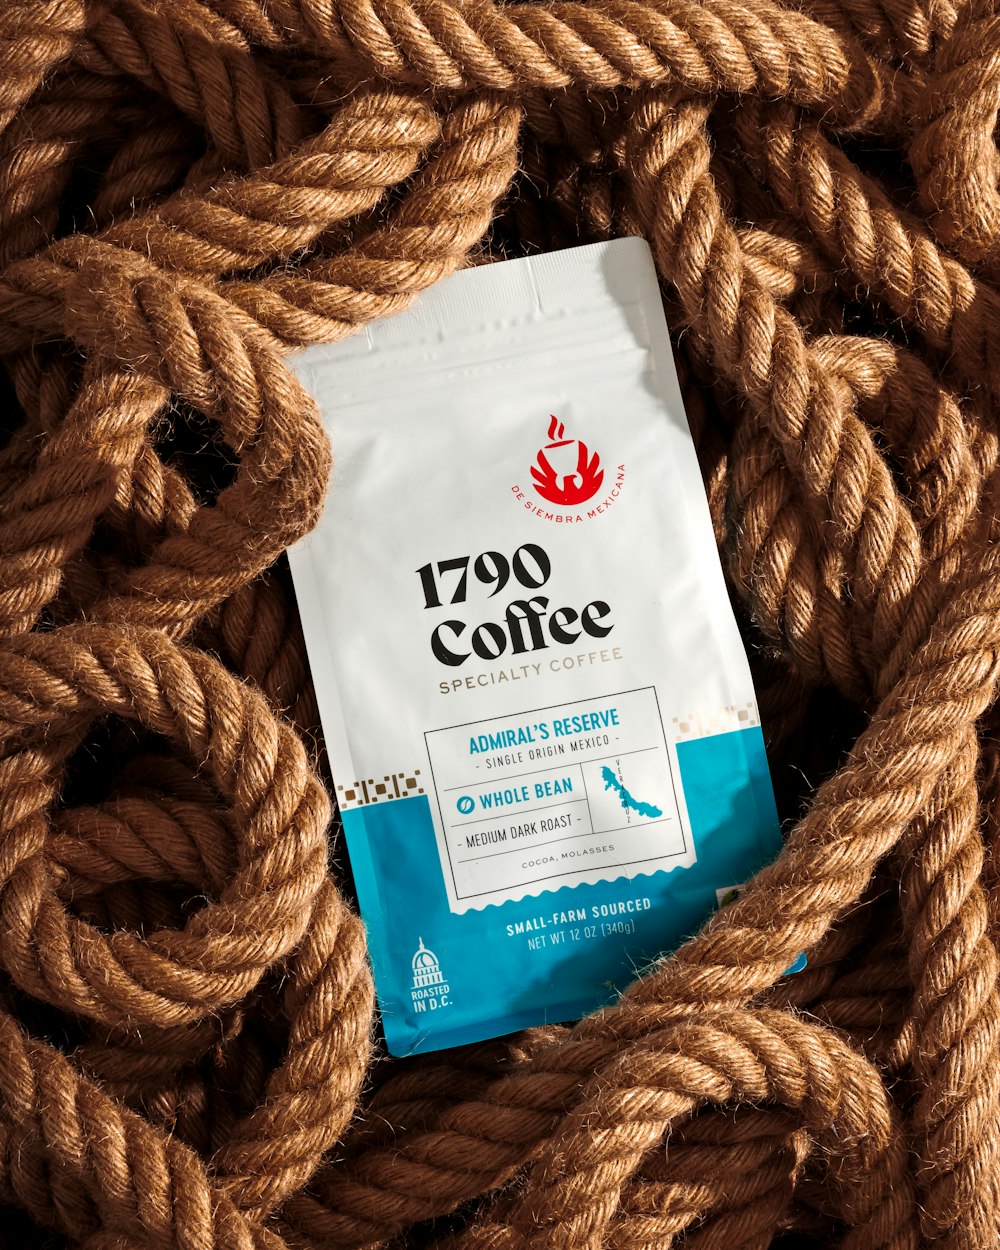 a bag of coffee sitting on top of a rope